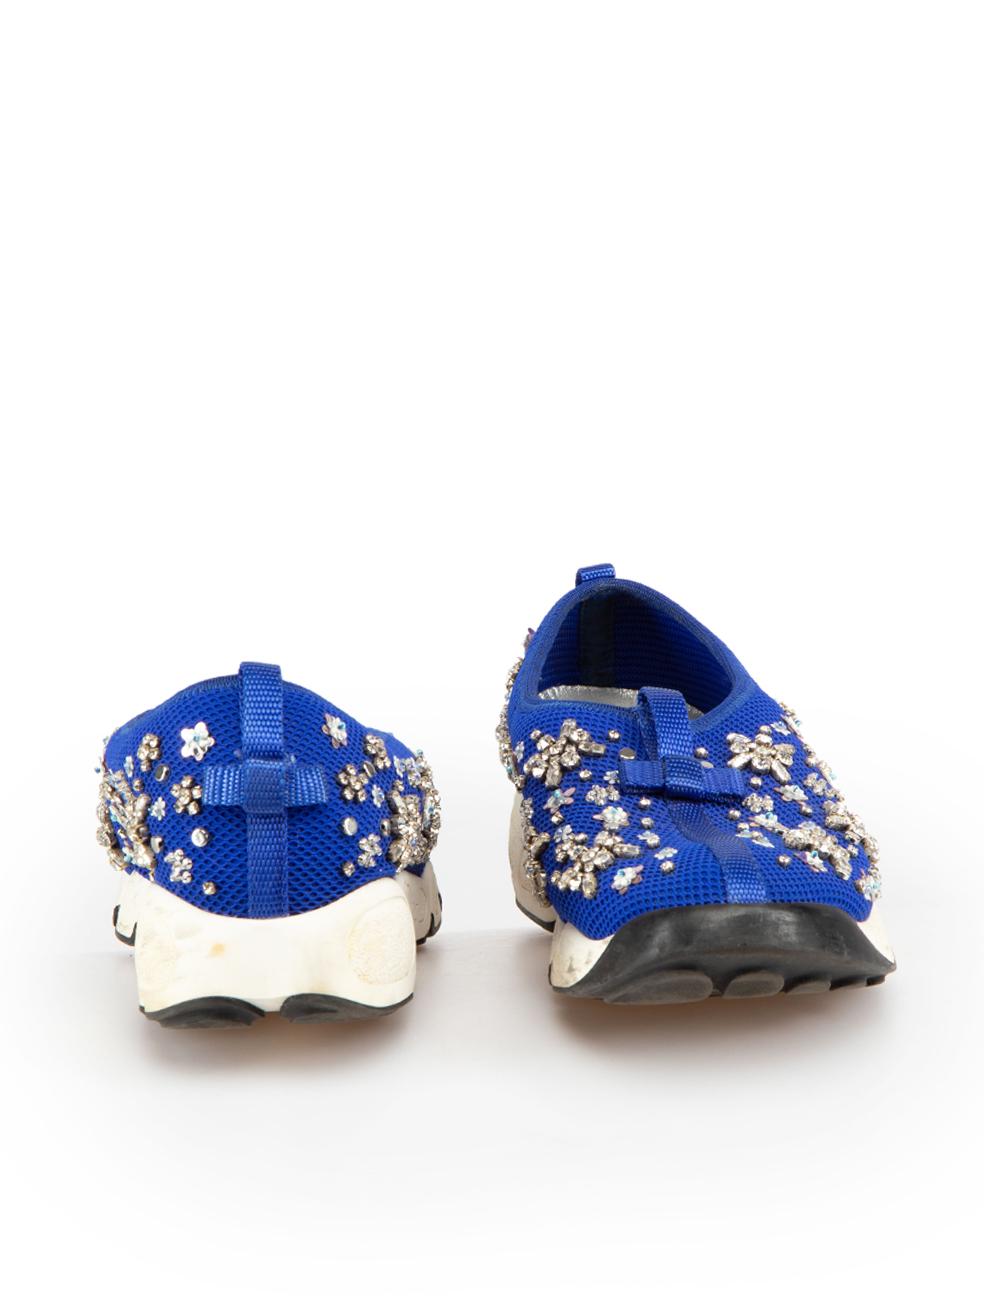 Dior Cobalt Blue Embellished Fusion Trainers Size IT 36 In Good Condition For Sale In London, GB